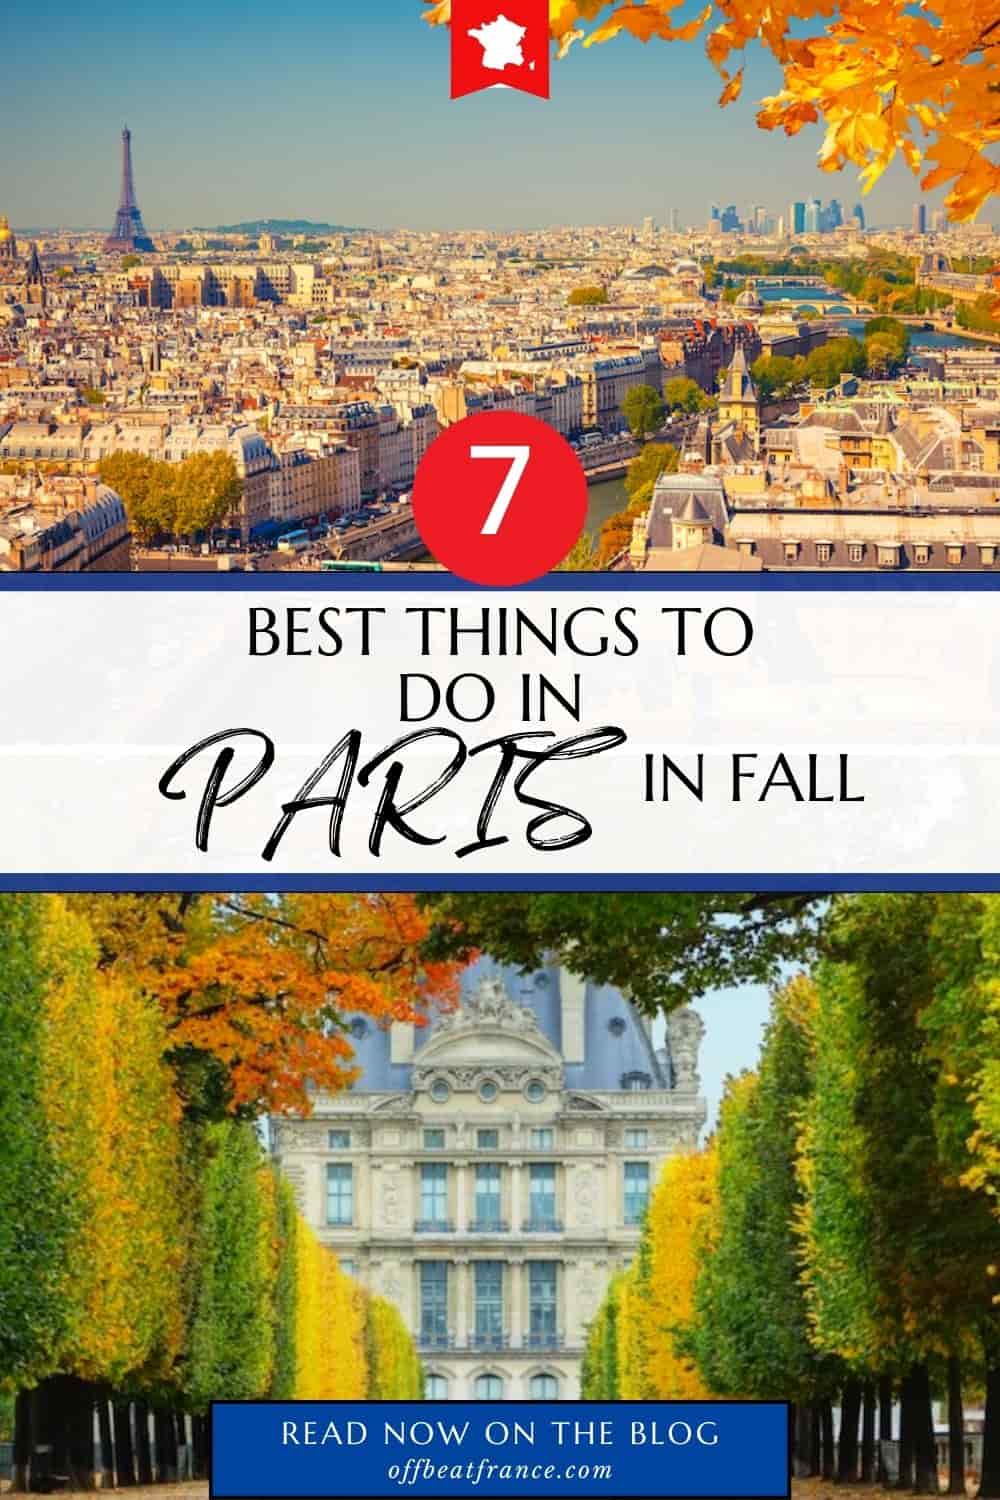 8 Tempting Things To Do In Paris In The Fall